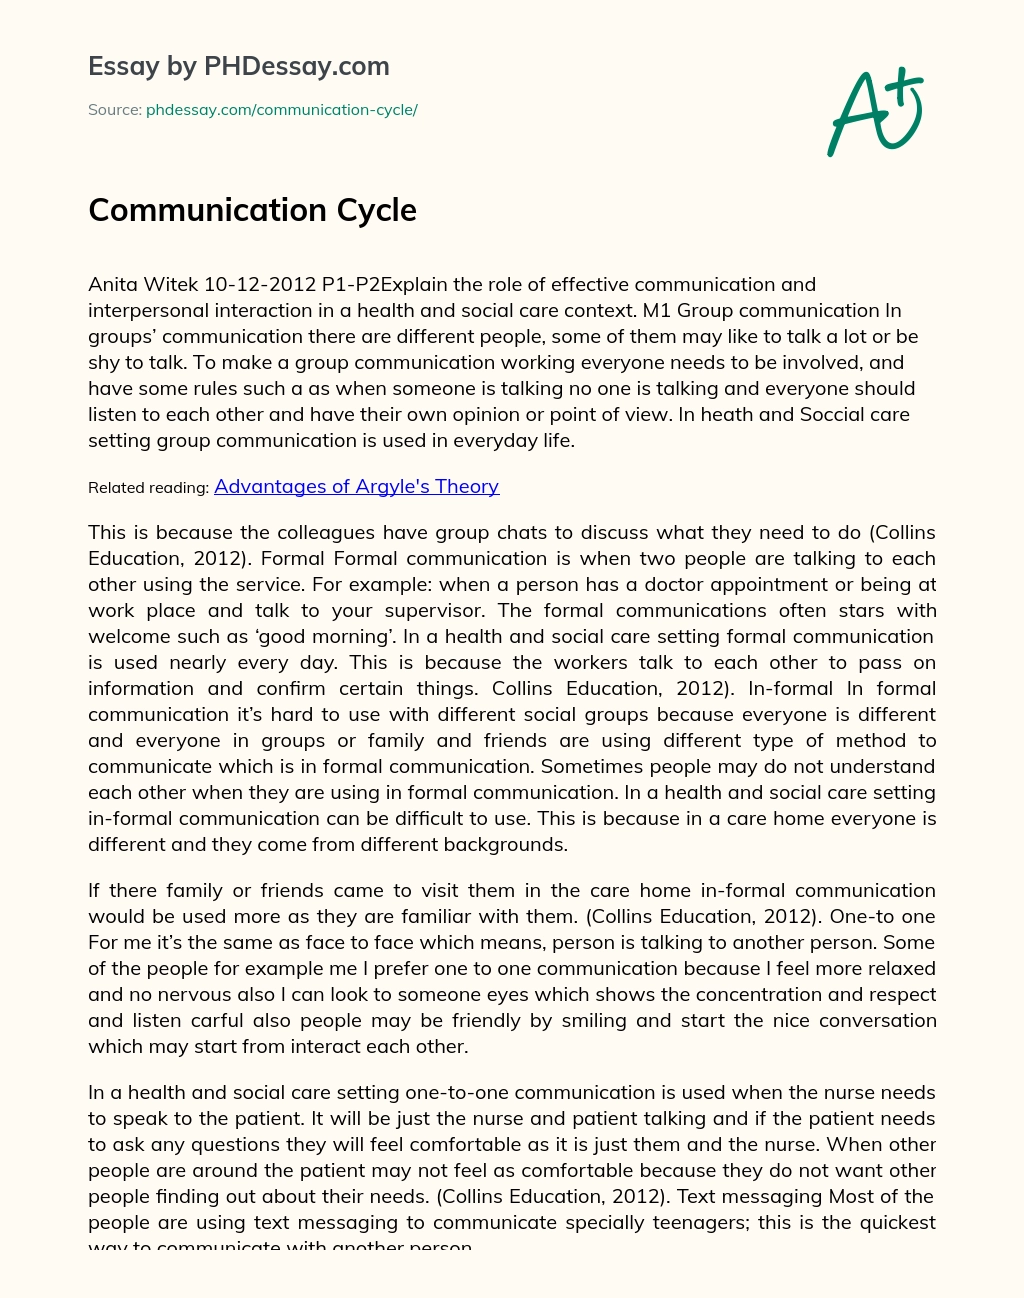 Communication Cycle essay